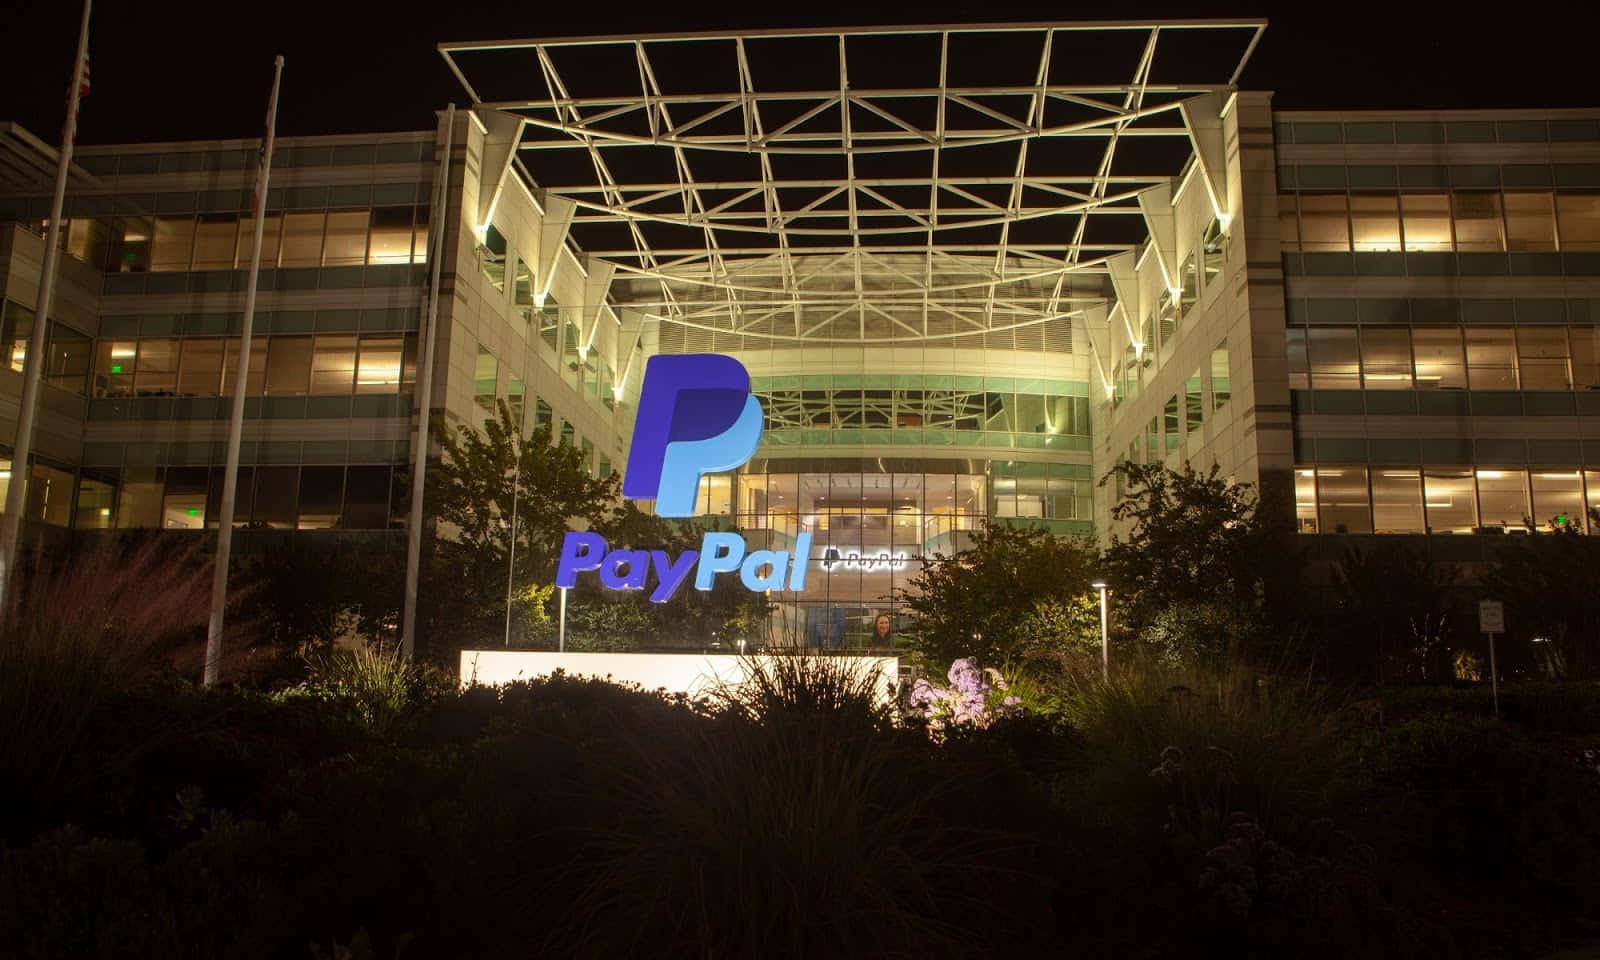 Get paid securely with PayPal